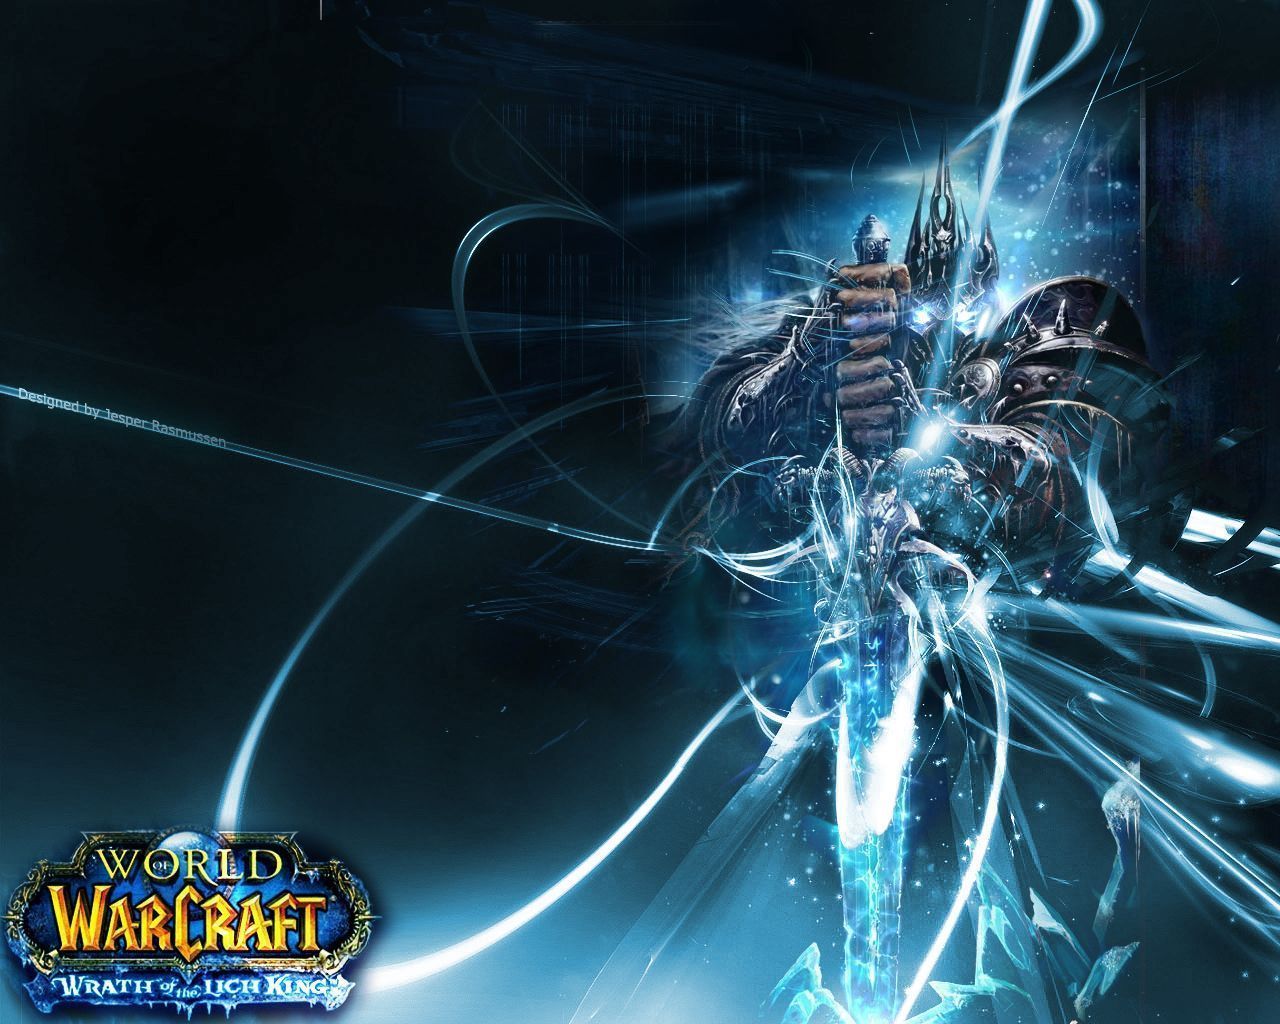 Lich King Wallpapers